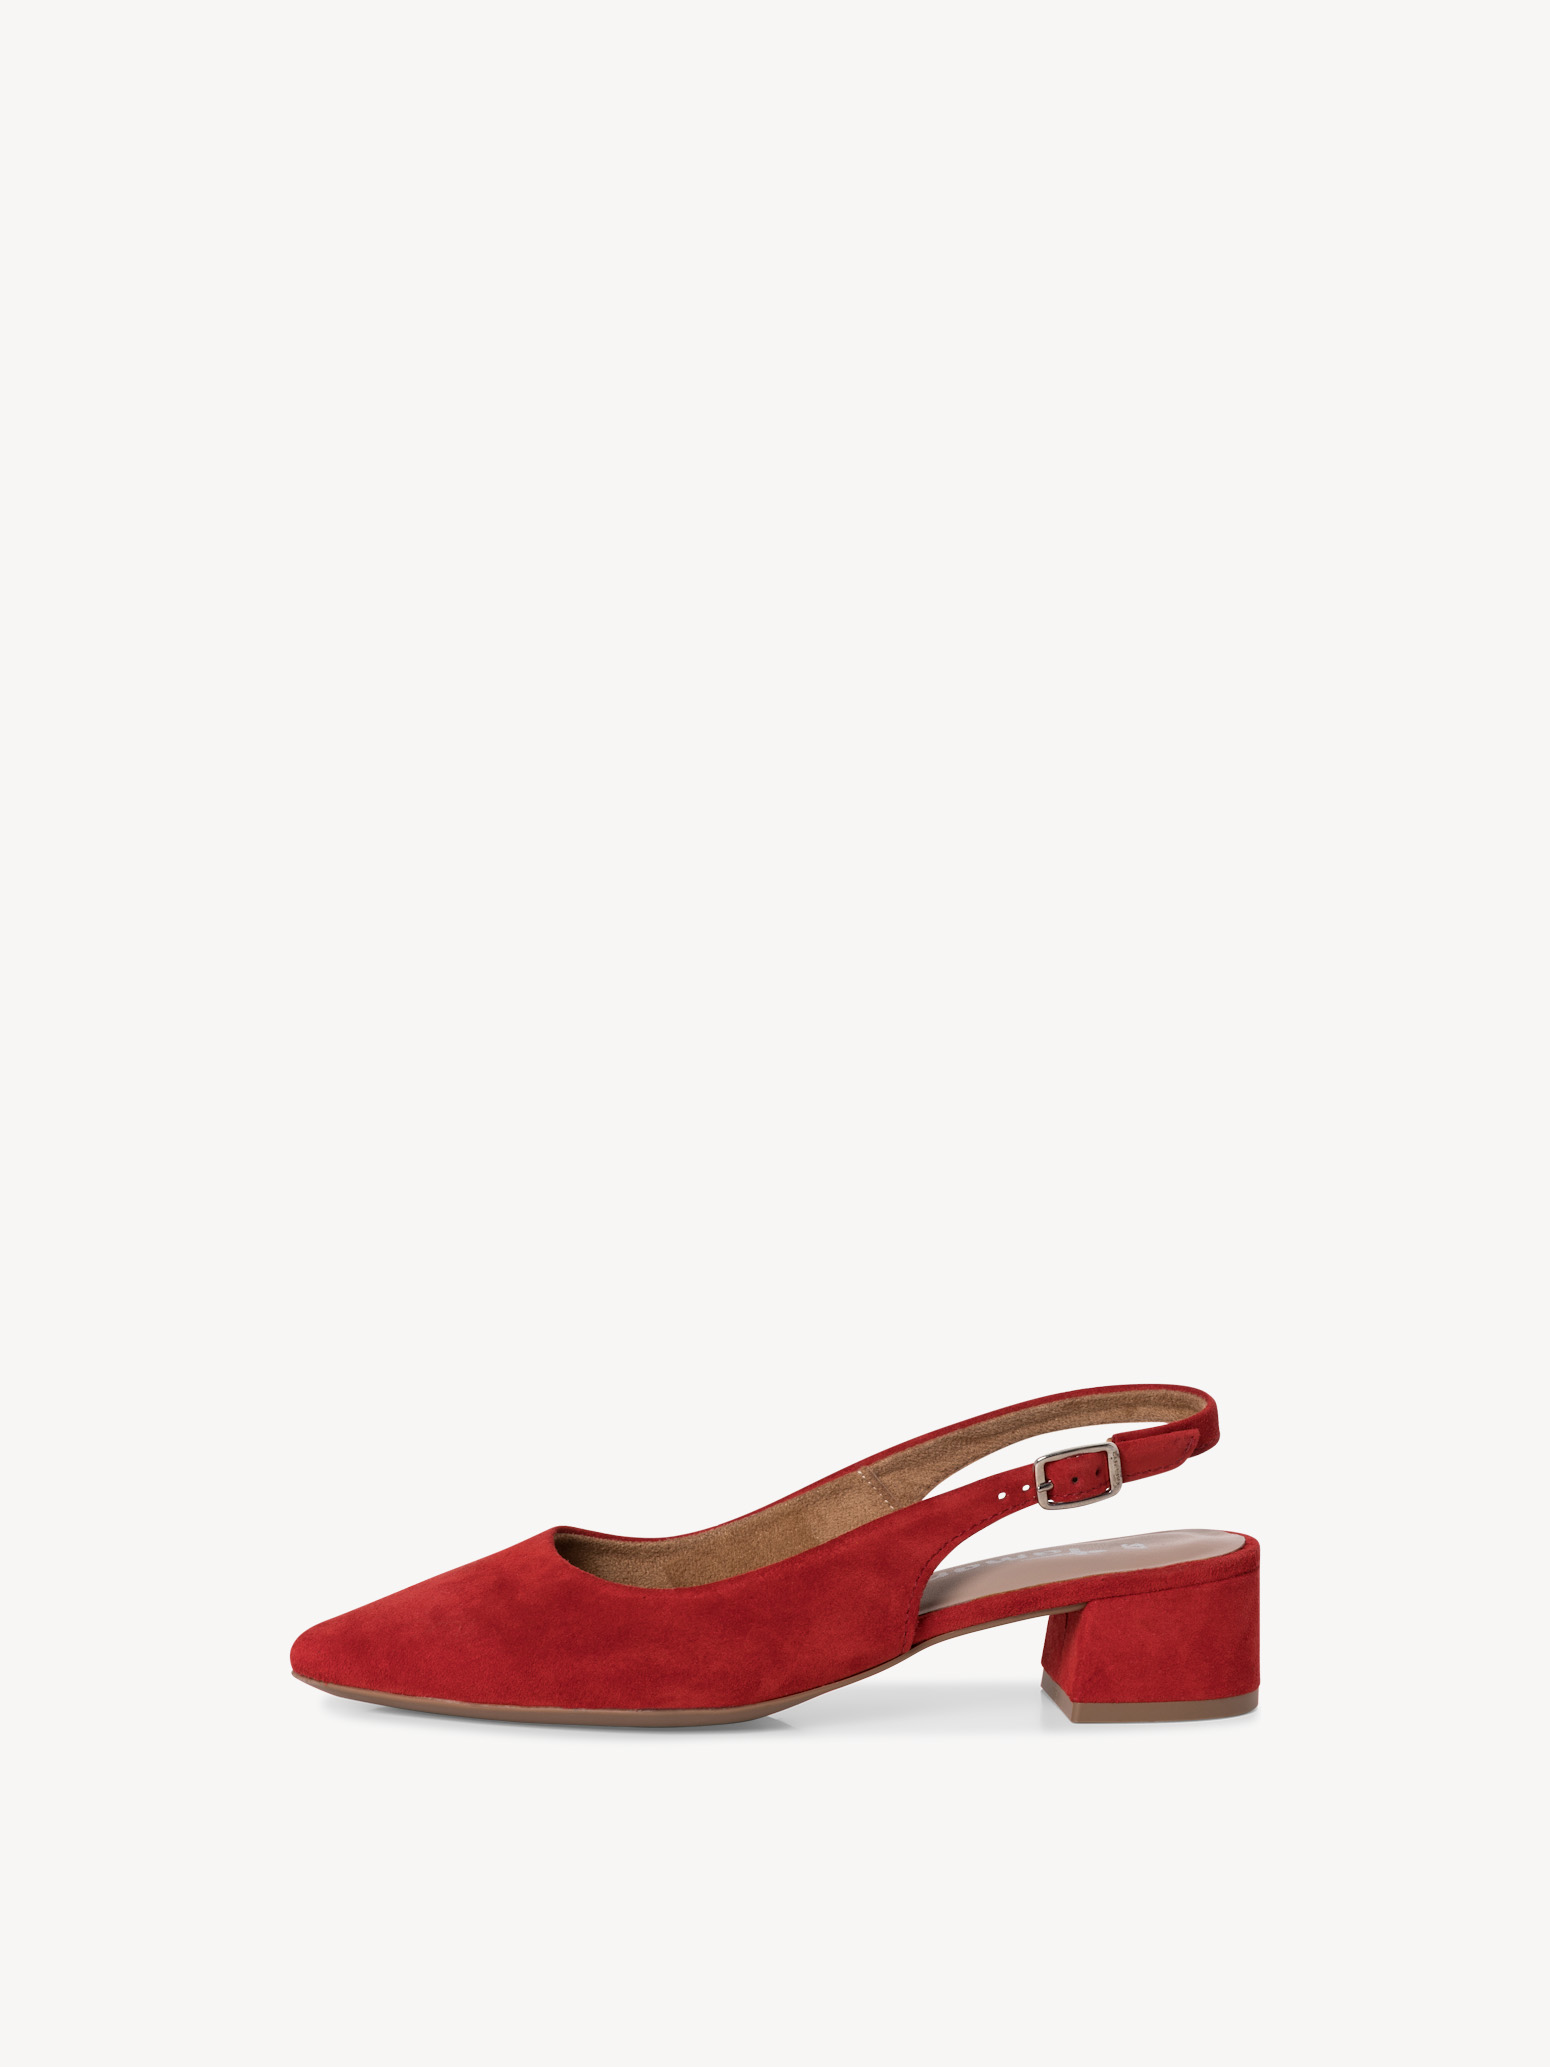 Leather sling pumps - red